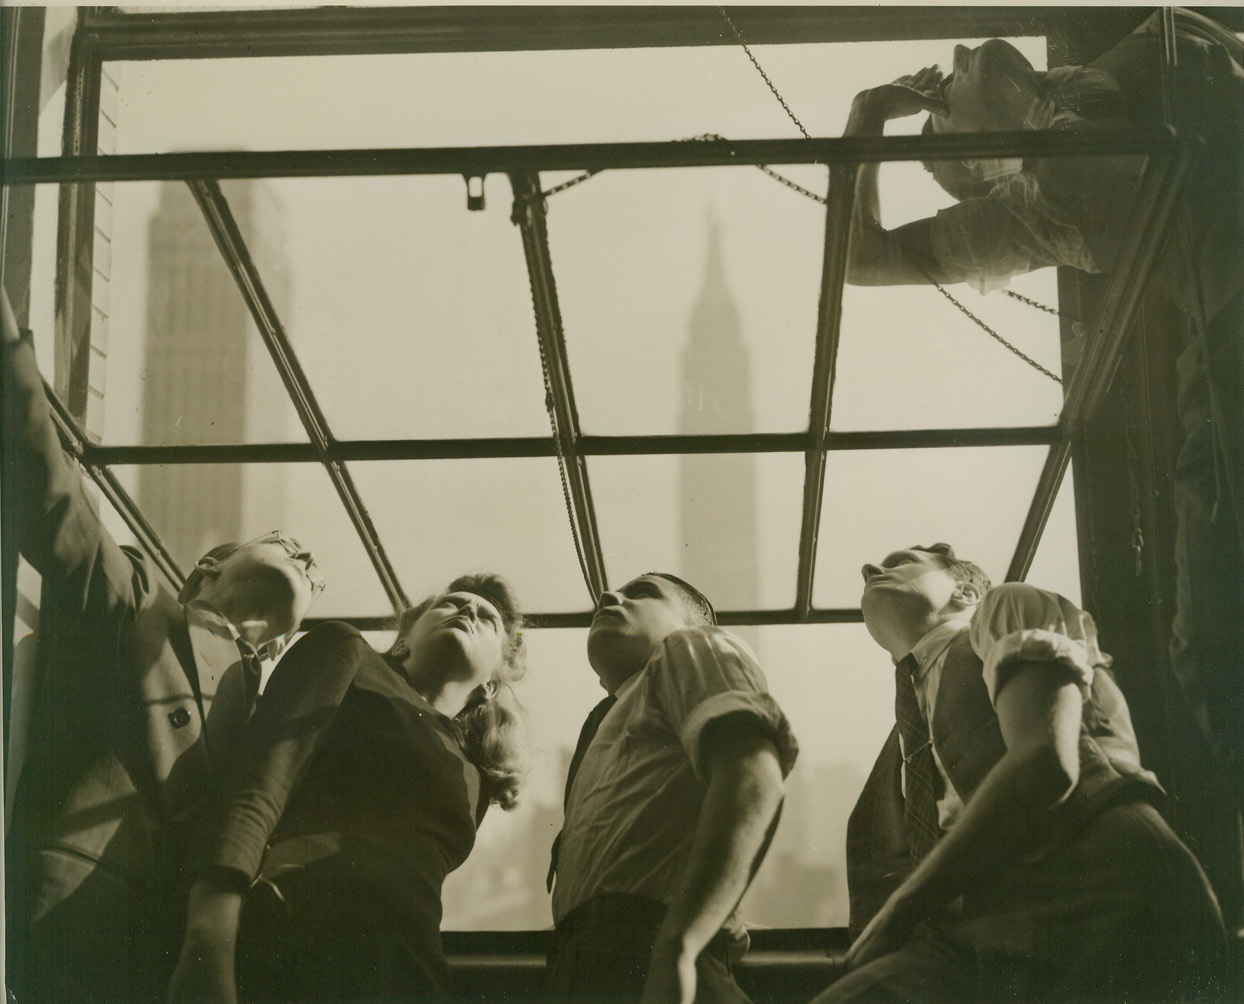 LOOKING FOR INVADERS, 12/10/41  NEW YORK – This morning (Dec. 10) air raid sirens started blowing in this city. Office workers, having just arrived at their place of employment in midtown, scampered to the window and peered skyward, looking for enemy planes. The alarm was shortlived, however, the all clear being announced within a few moments. Directly in the background can be seen the World’s Tallest Building – The Empire State Bldg. Credit: OWI Radiophoto from ACME;